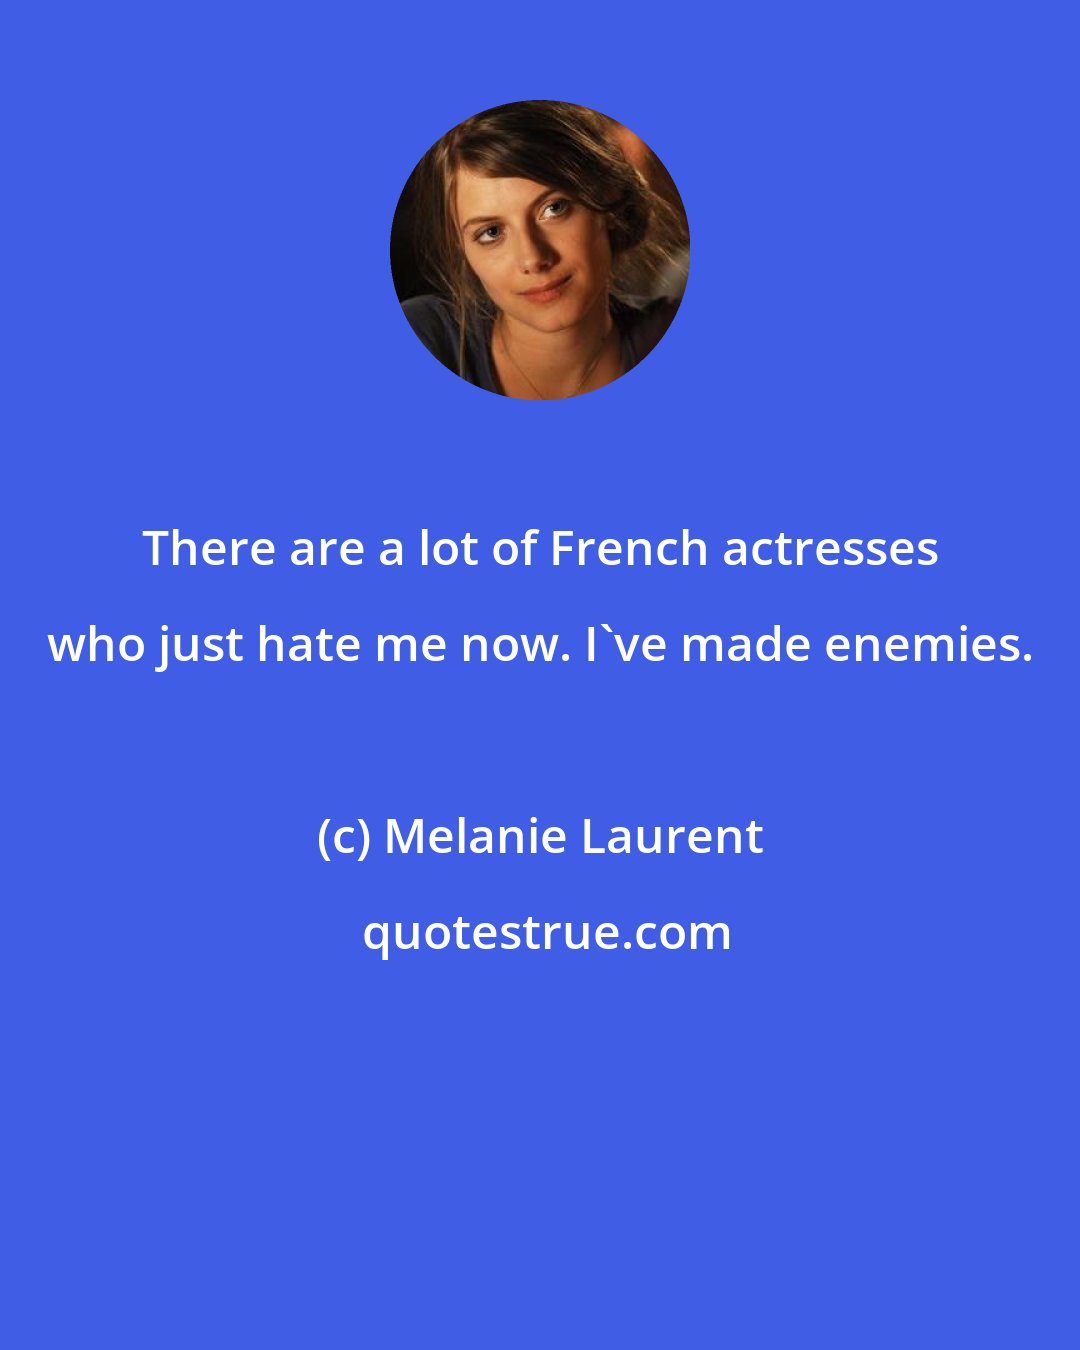 Melanie Laurent: There are a lot of French actresses who just hate me now. I've made enemies.